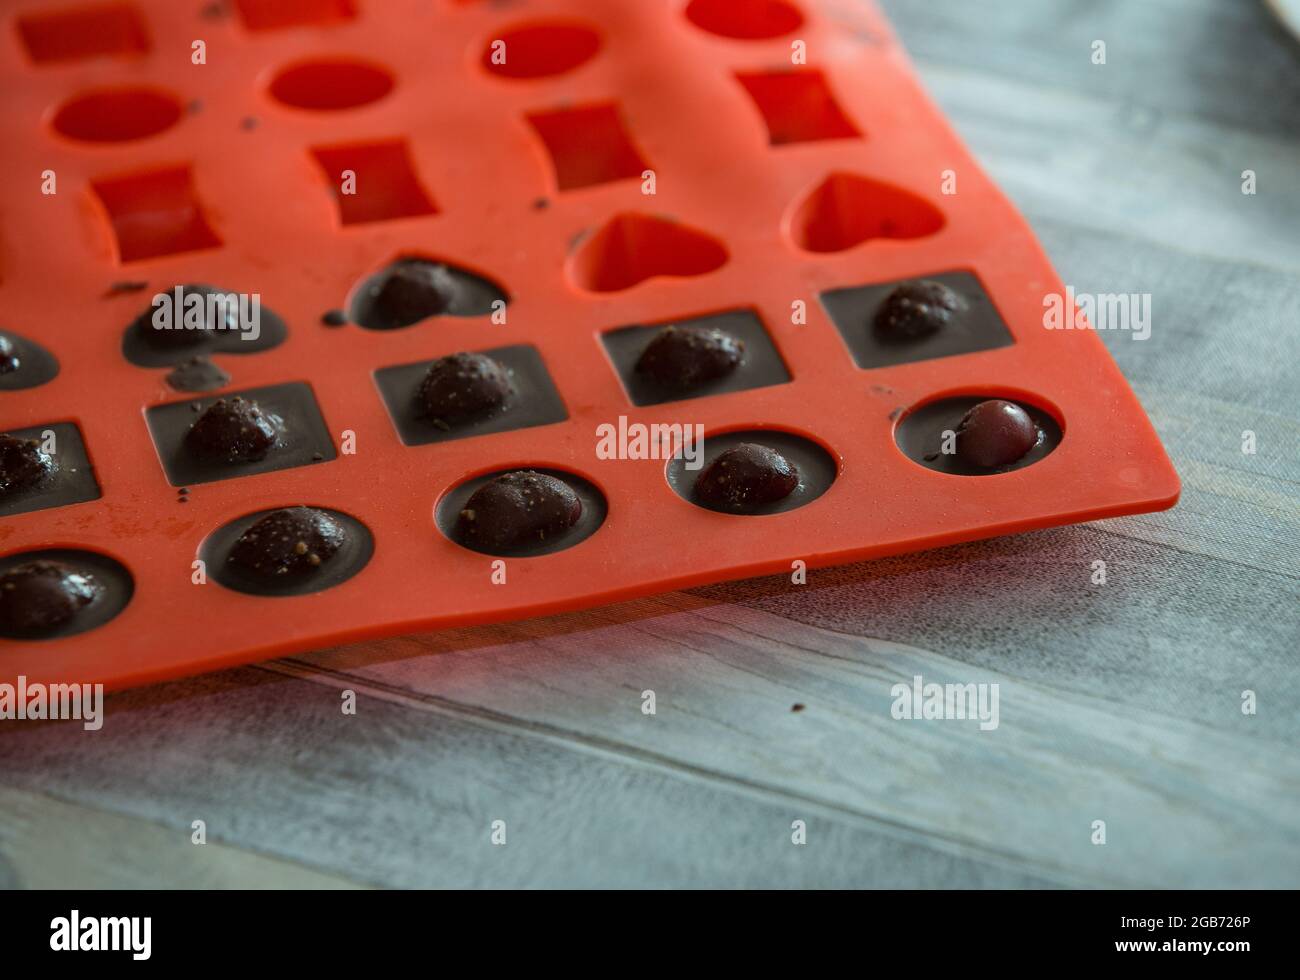 Step-by-step process of making chocolates from dark chocolate and cherries in cognac at home. Candies in silicone molds are prepared for packaging. Cu Stock Photo